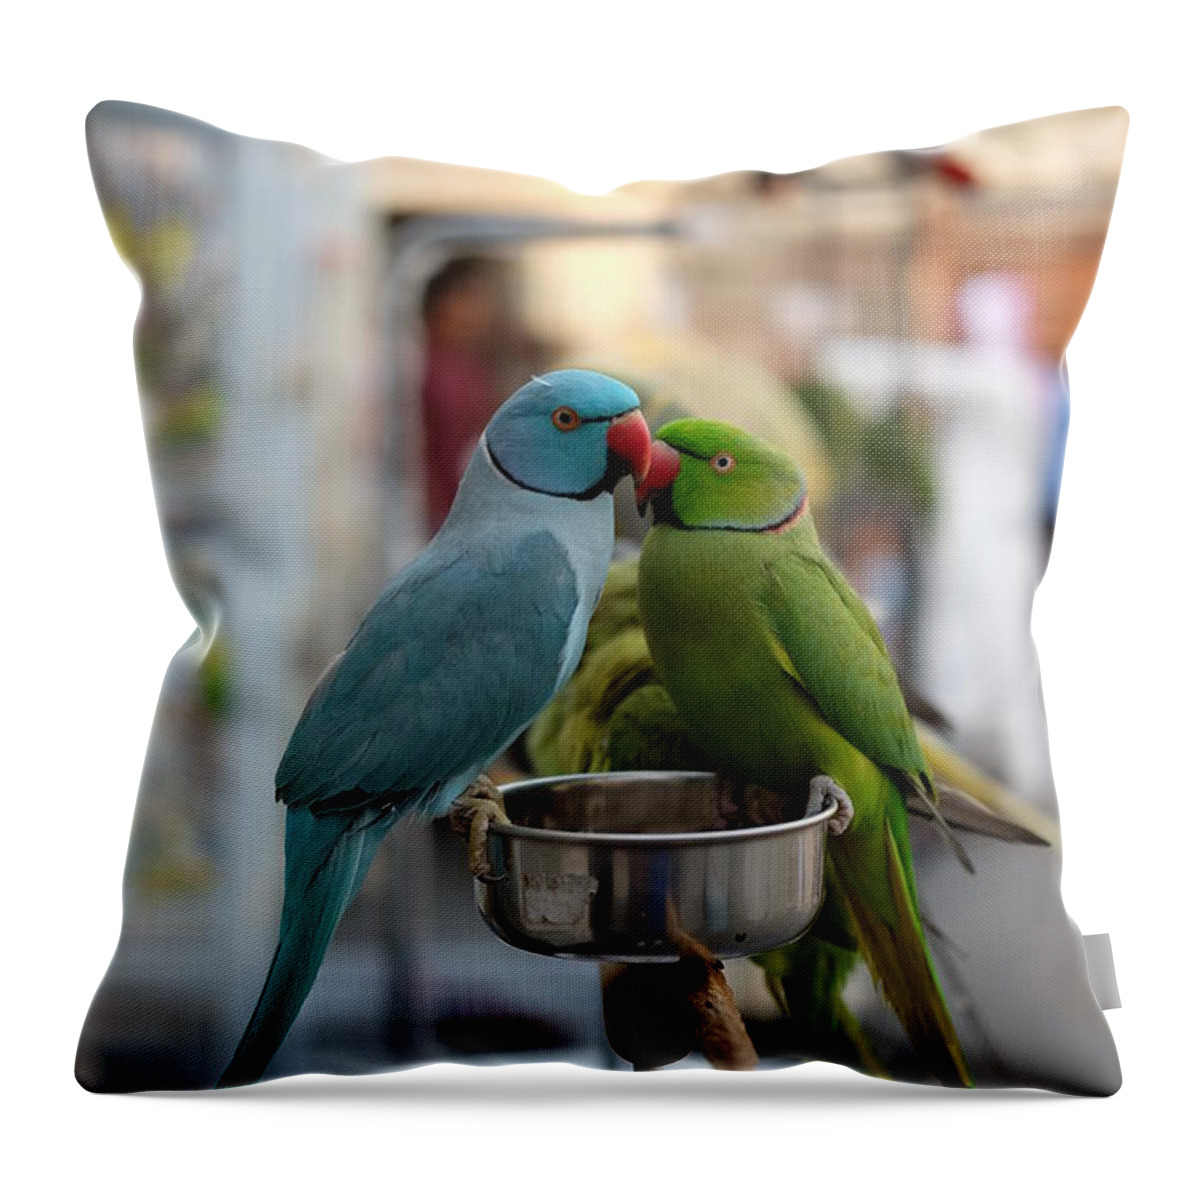 Parrot Throw Pillow featuring the photograph Two Parrots Perching On Bowl by Ryan Joseph Elico / 500px